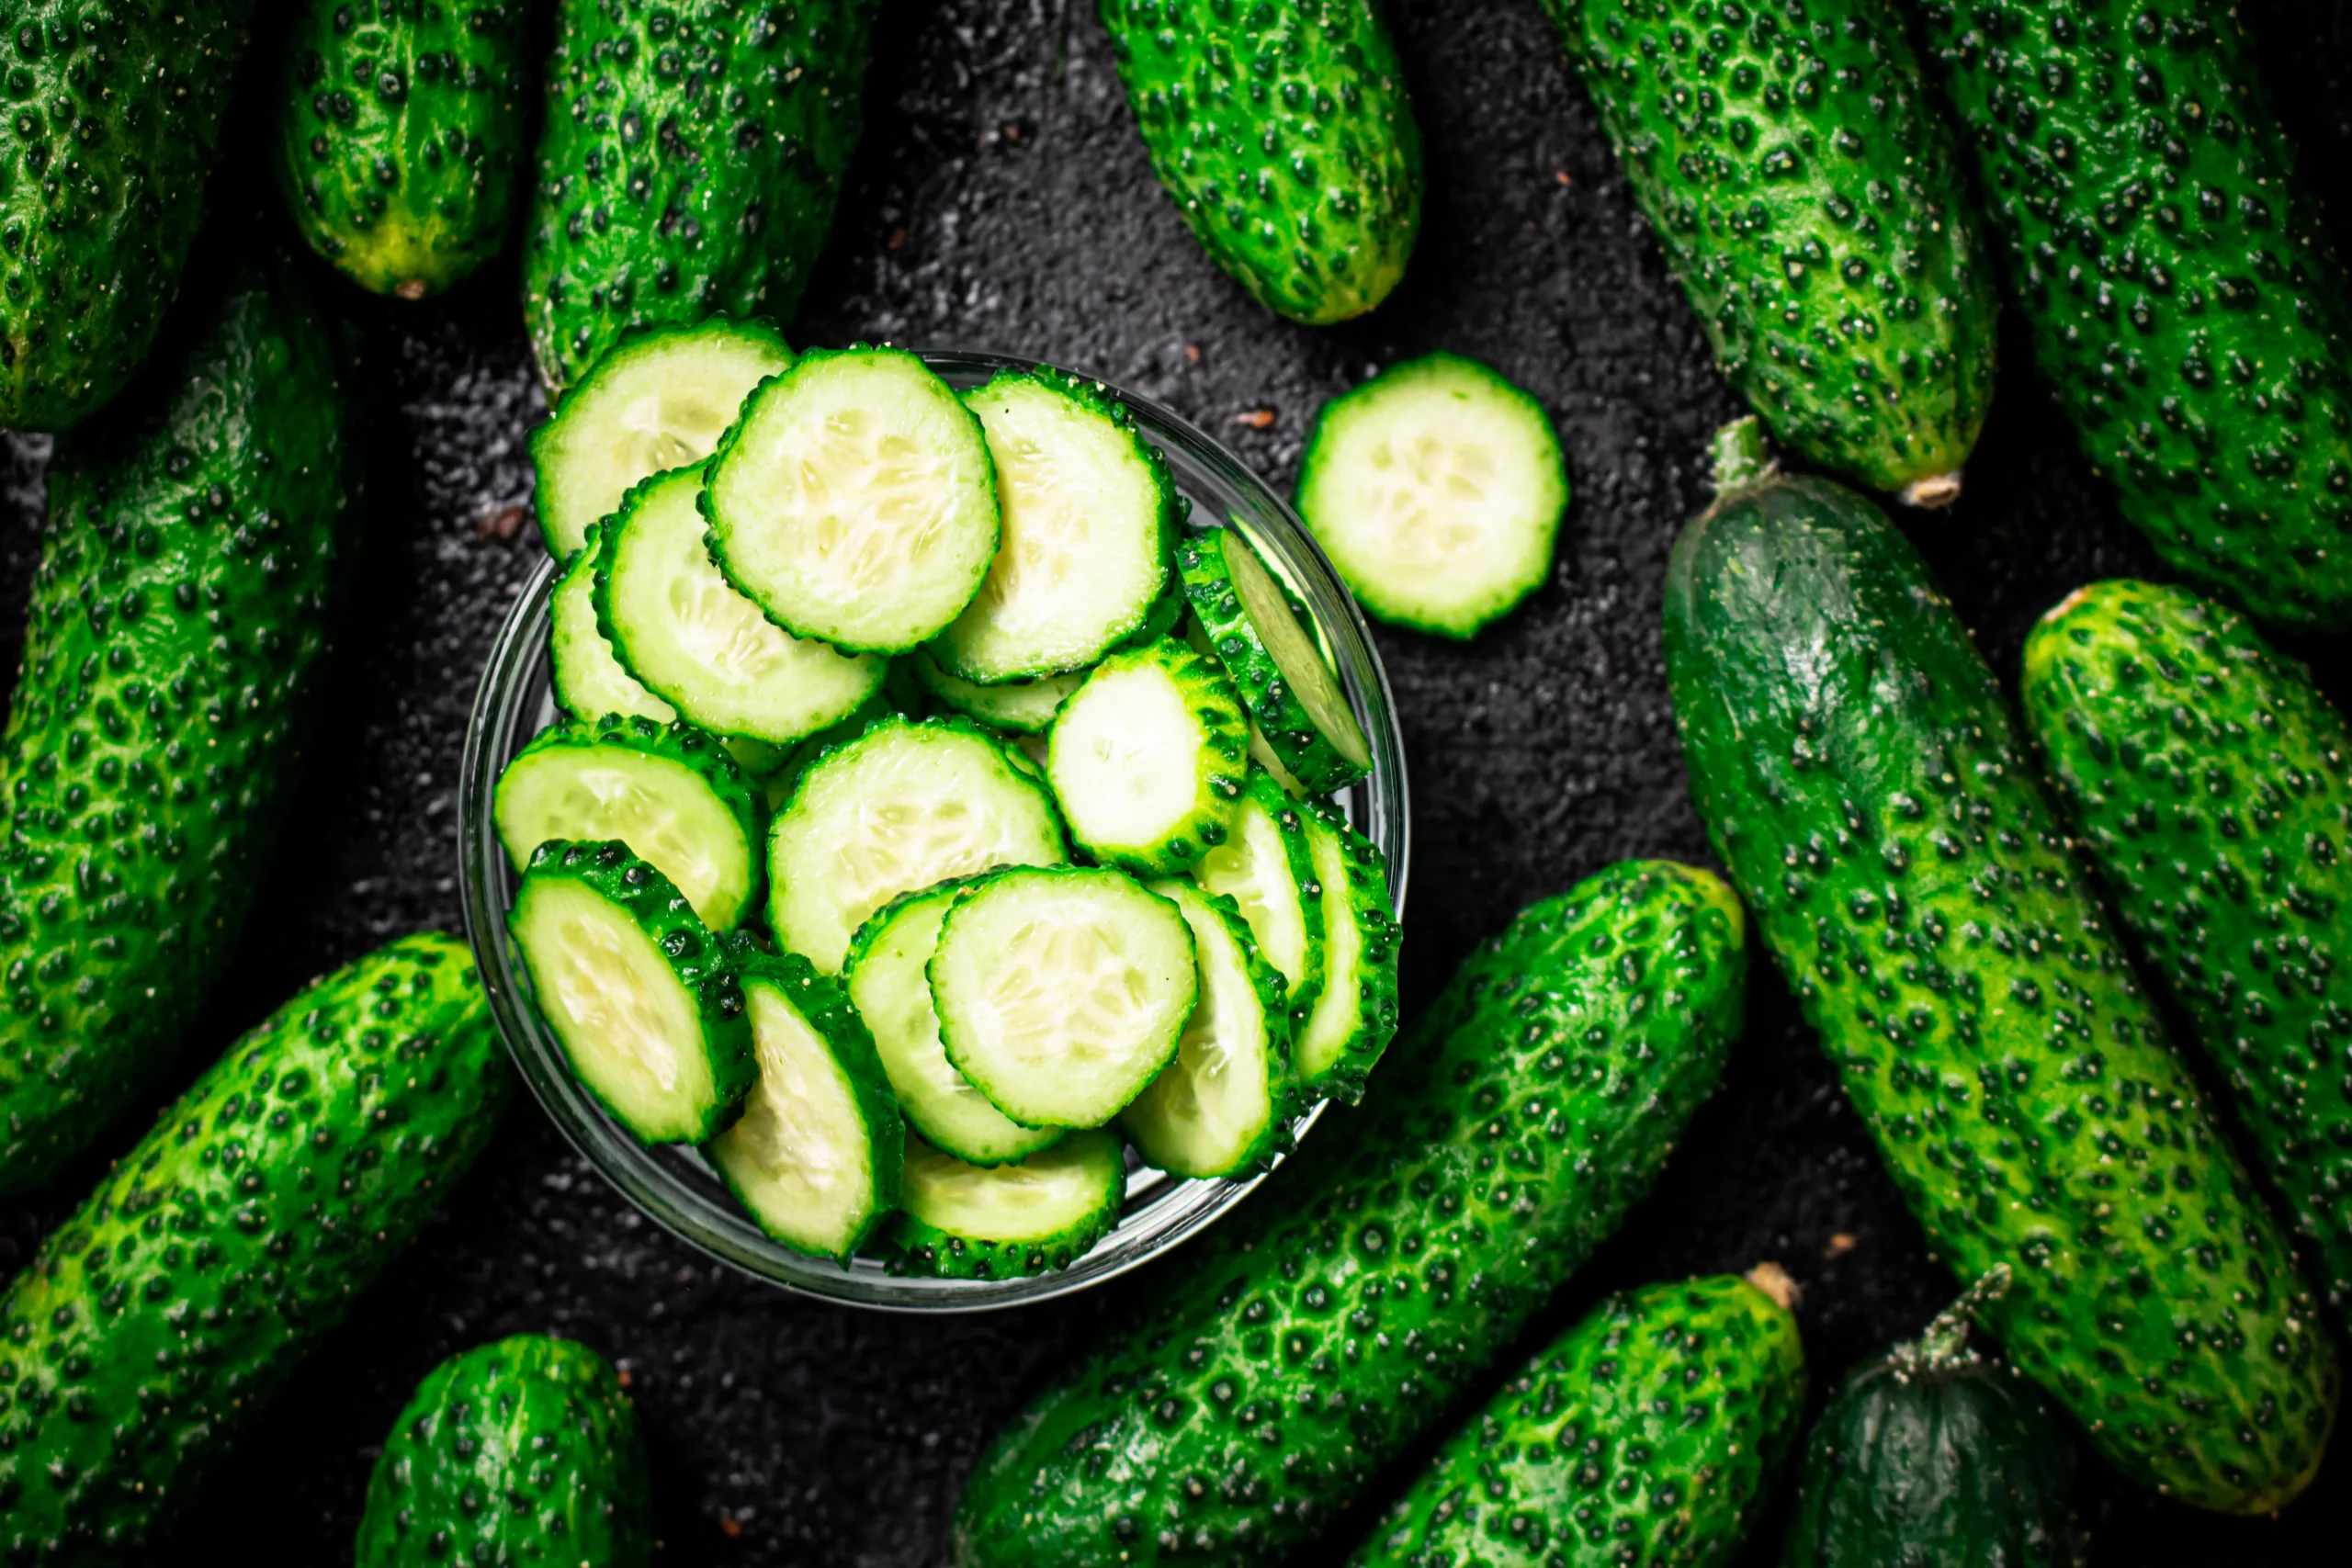 "A close-up image of a sliced cucumber and cucumber slices on a white background."